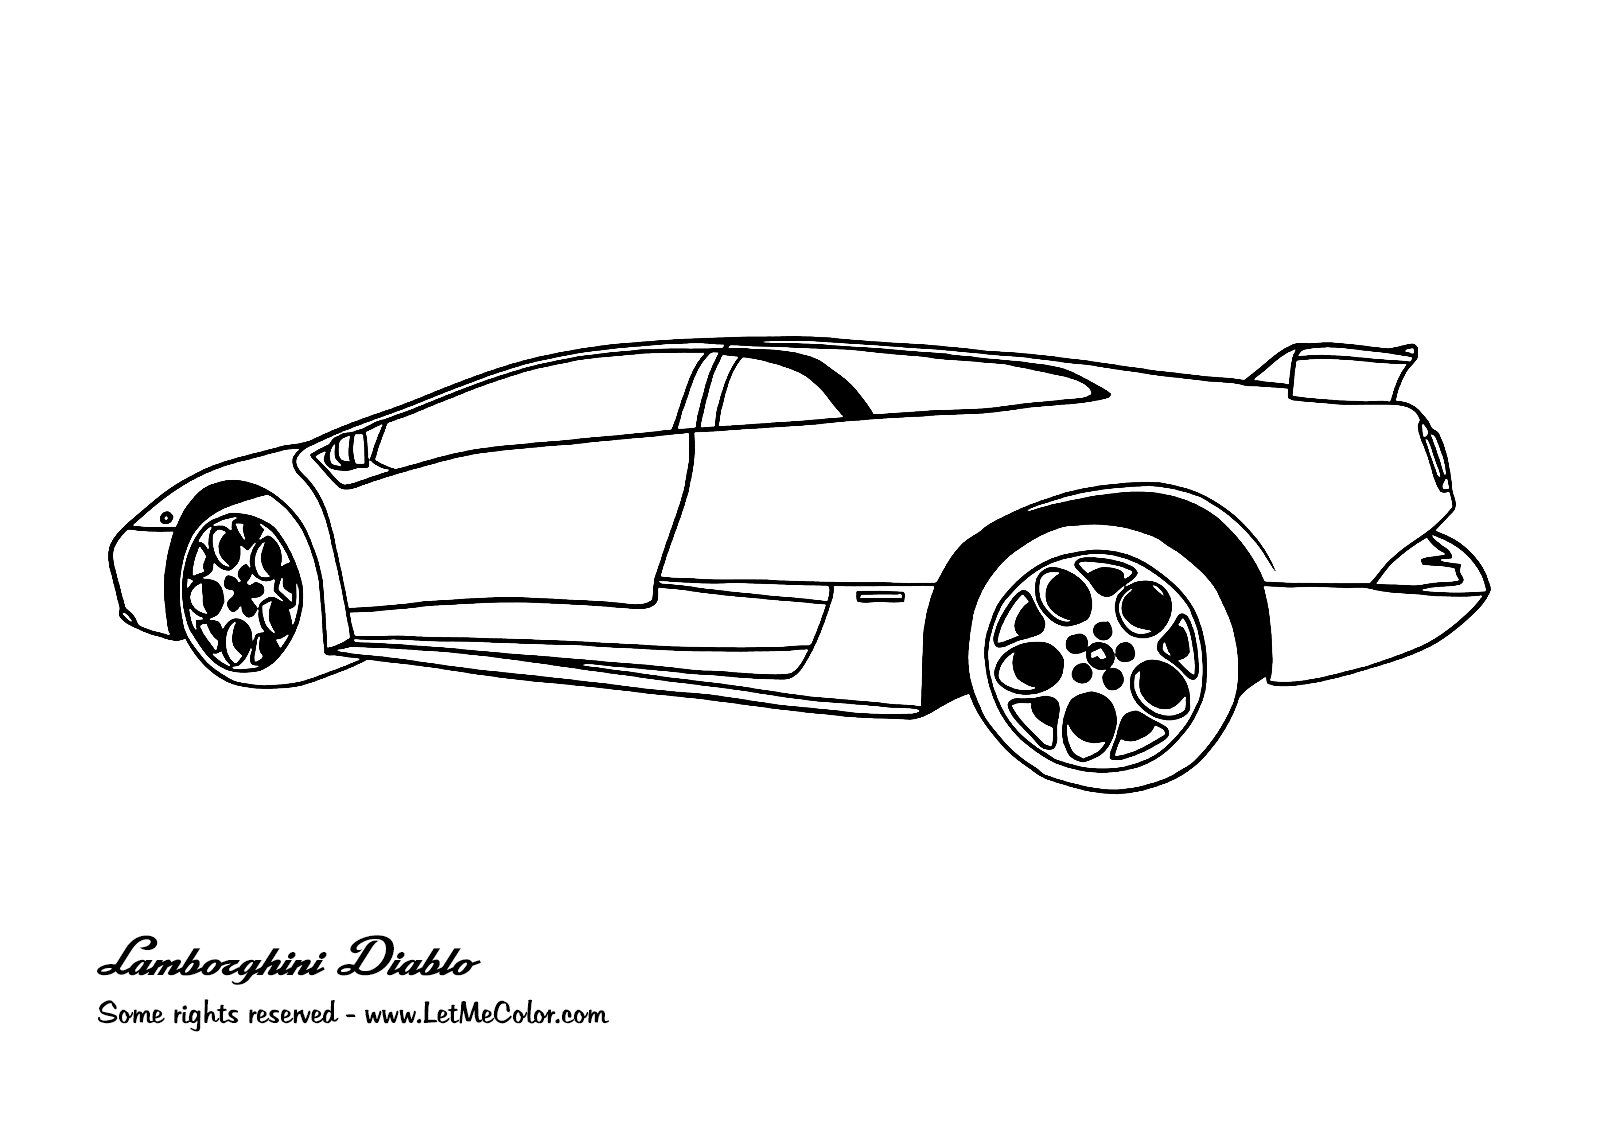 Cars With Butterfly Doors Coloring Pages - Coloring Pages For All Ages